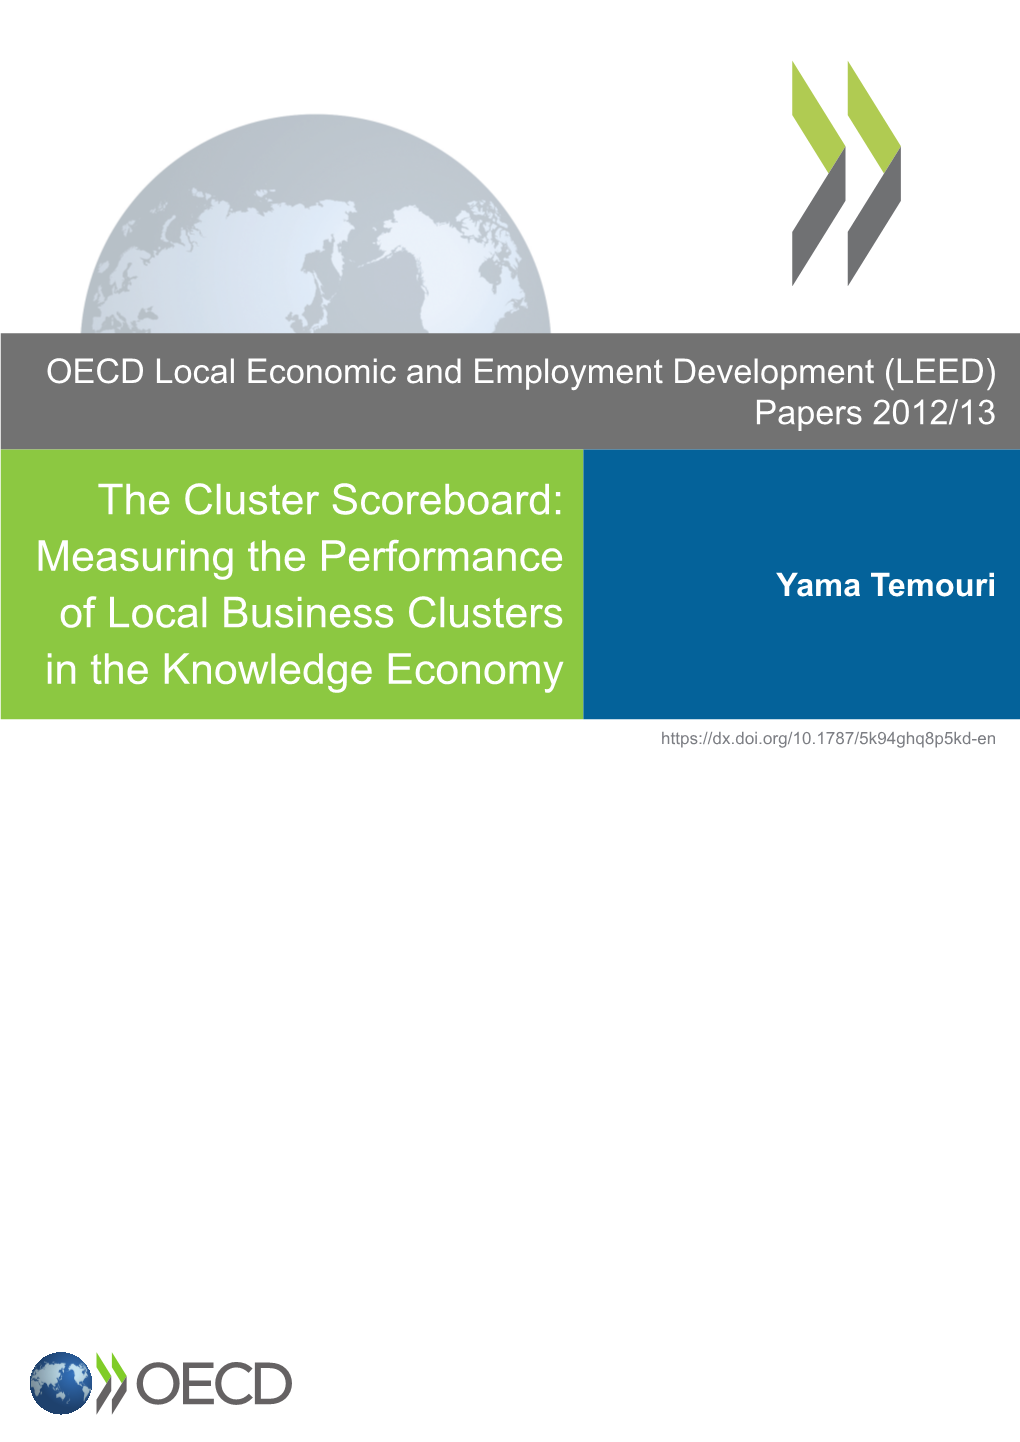 The Cluster Scoreboard: Measuring the Performance Yama Temouri of Local Business Clusters in the Knowledge Economy